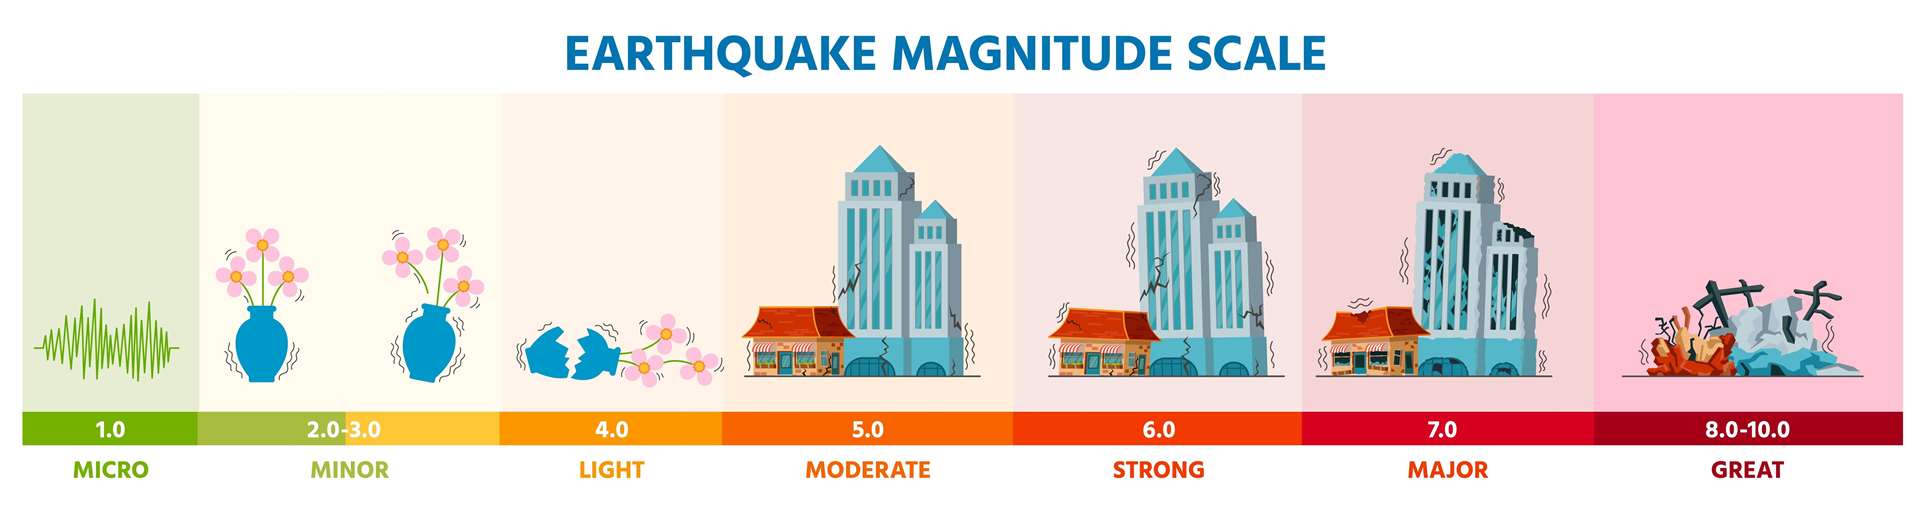 Earthquake seismic Richter magnitude scale infographic with buildings.